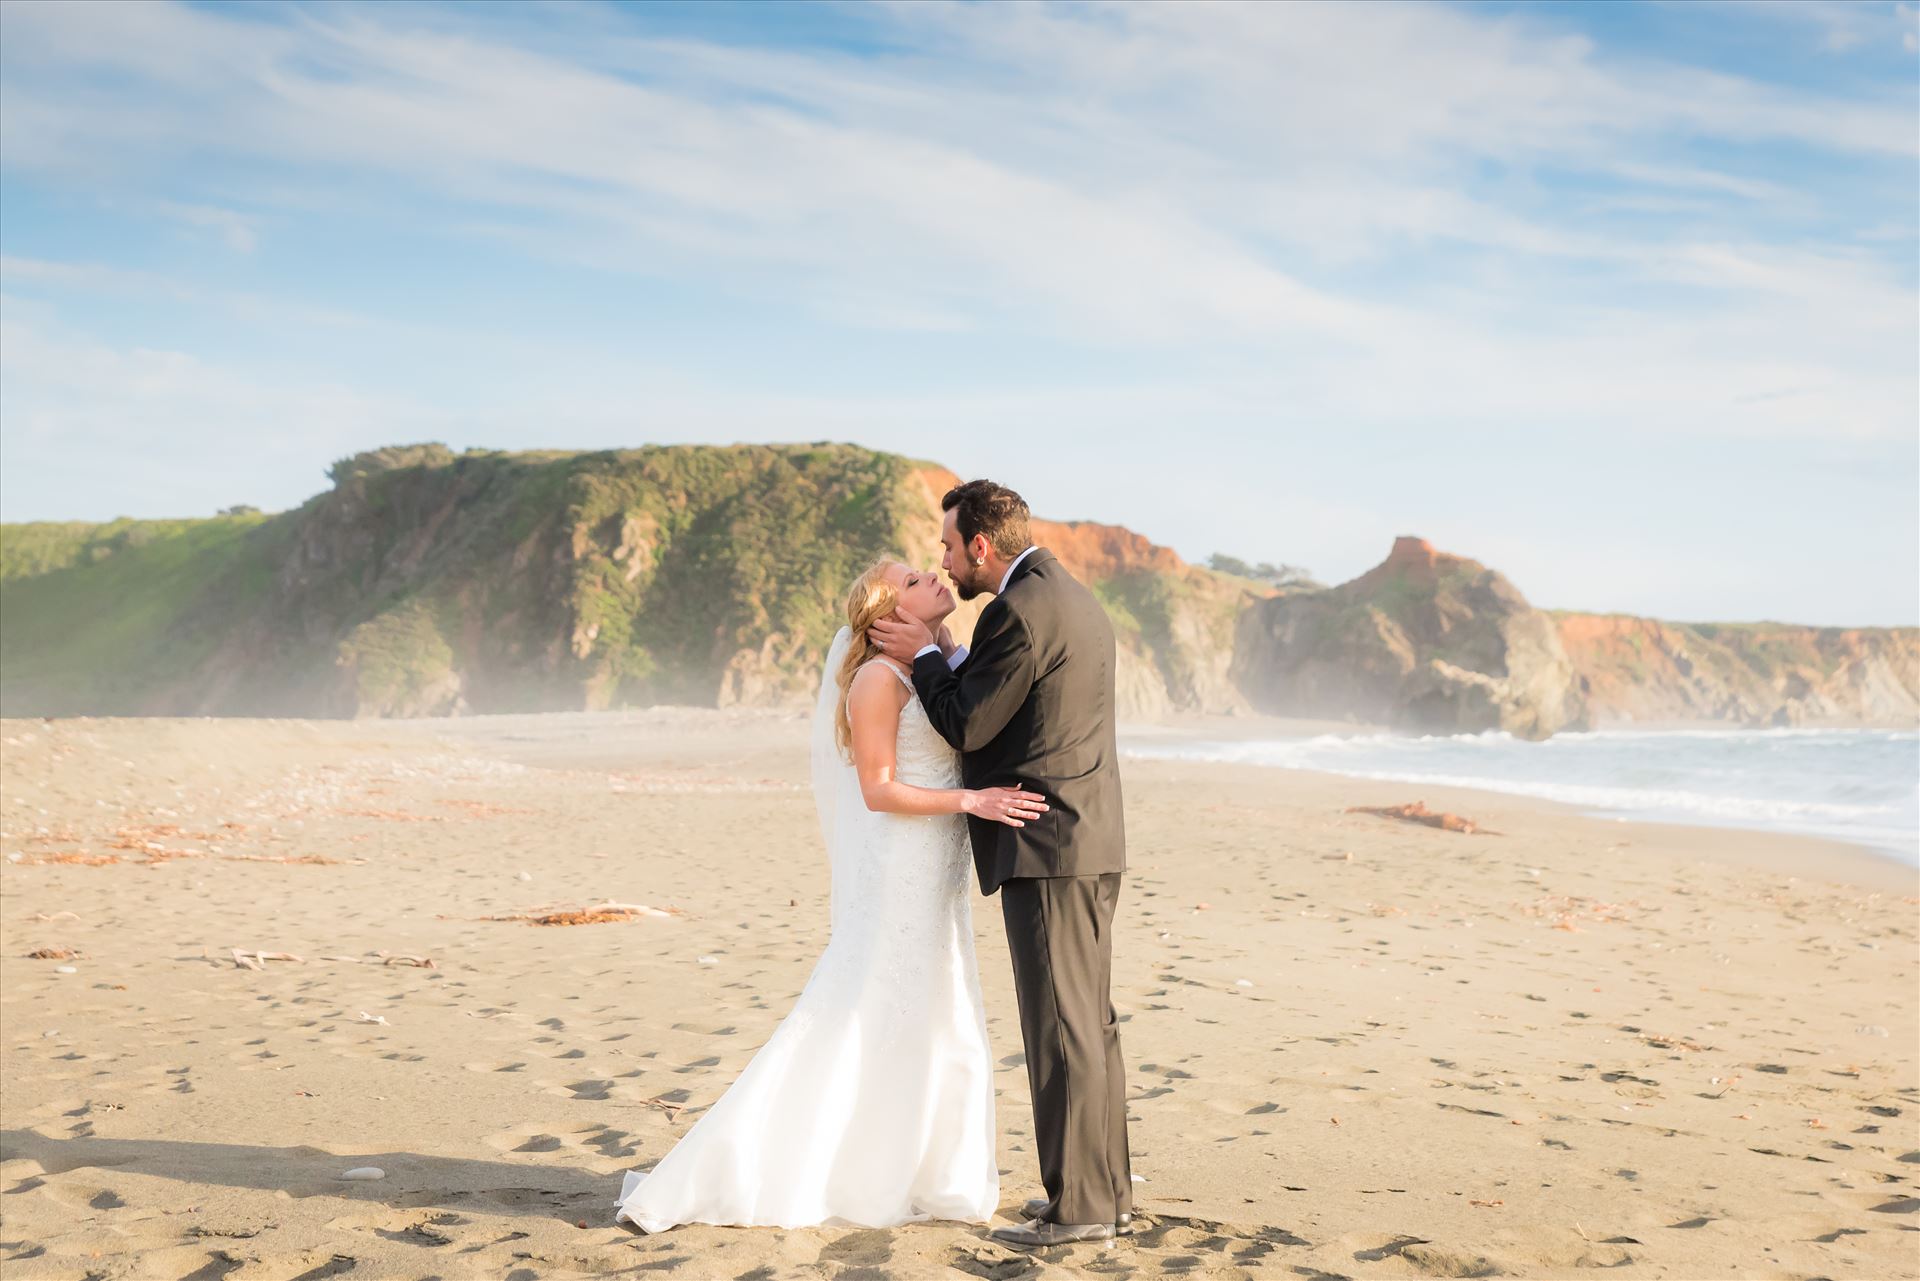 Adele and Jason 23 Ragged Point Inn Wedding Elopement photography by Mirror's Edge Photography in San Simeon Cambria California. Bride and Groom at sunset on the beach. Big Sur Wedding Photography by Sarah Williams